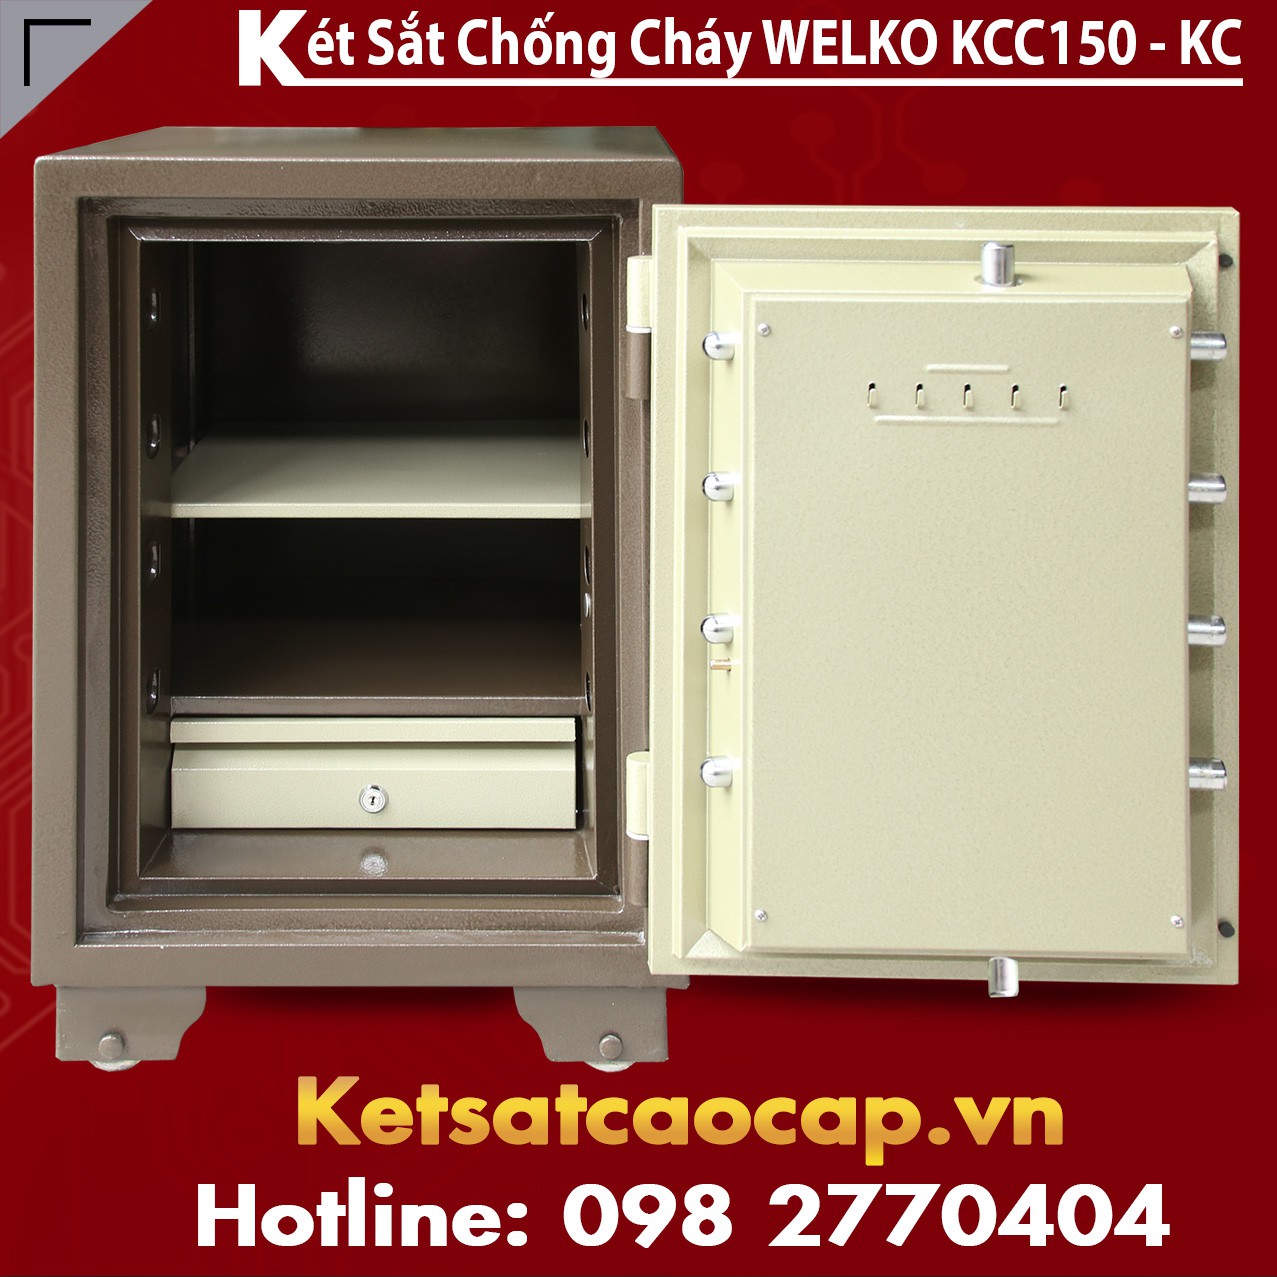 Burglary Fire Safes Manufacturers Factory Direct & Fast Shipping Dai Ly Ket Sat Mini Han Quoc Chinh Hang